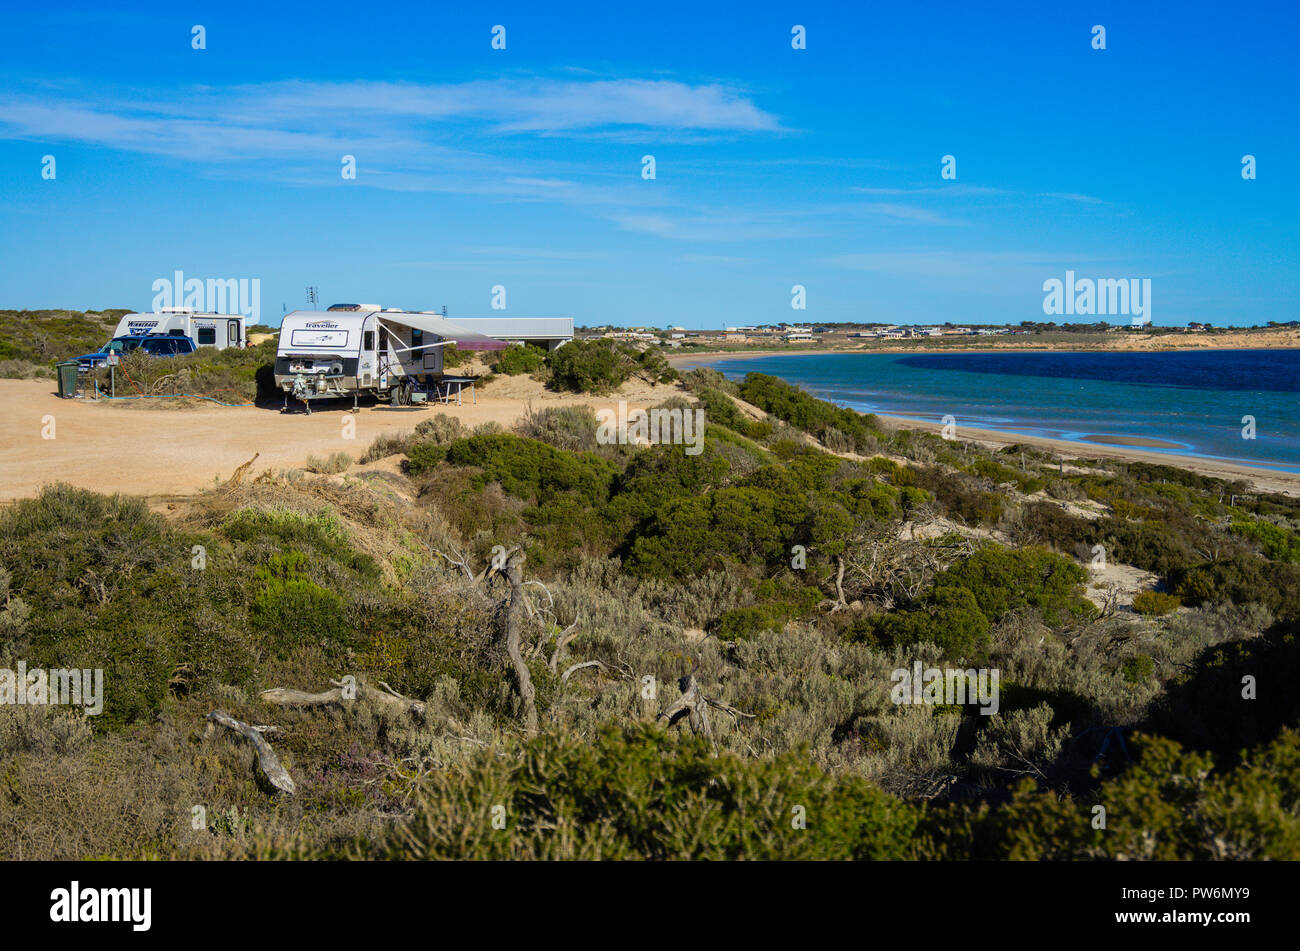 Caravans parked up at dunes over looking Shelly Beach Ceduna, South Australia Stock Photo